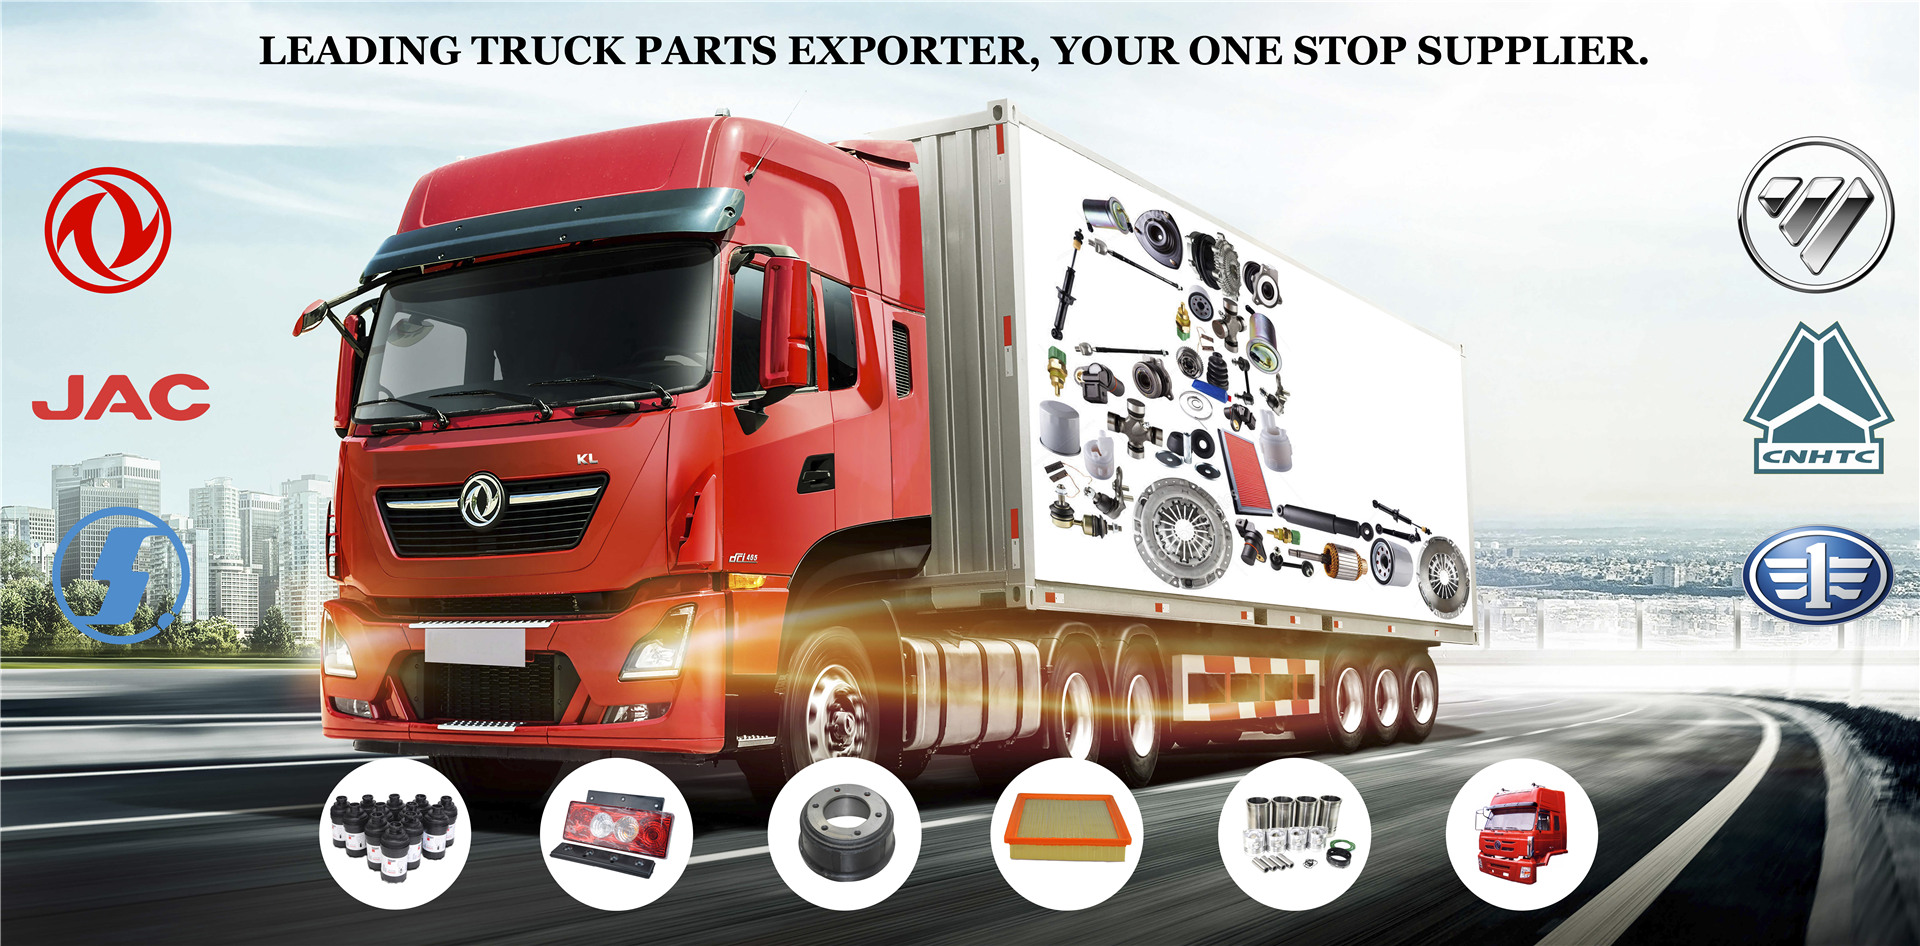 Leading Truck Parts Exporter